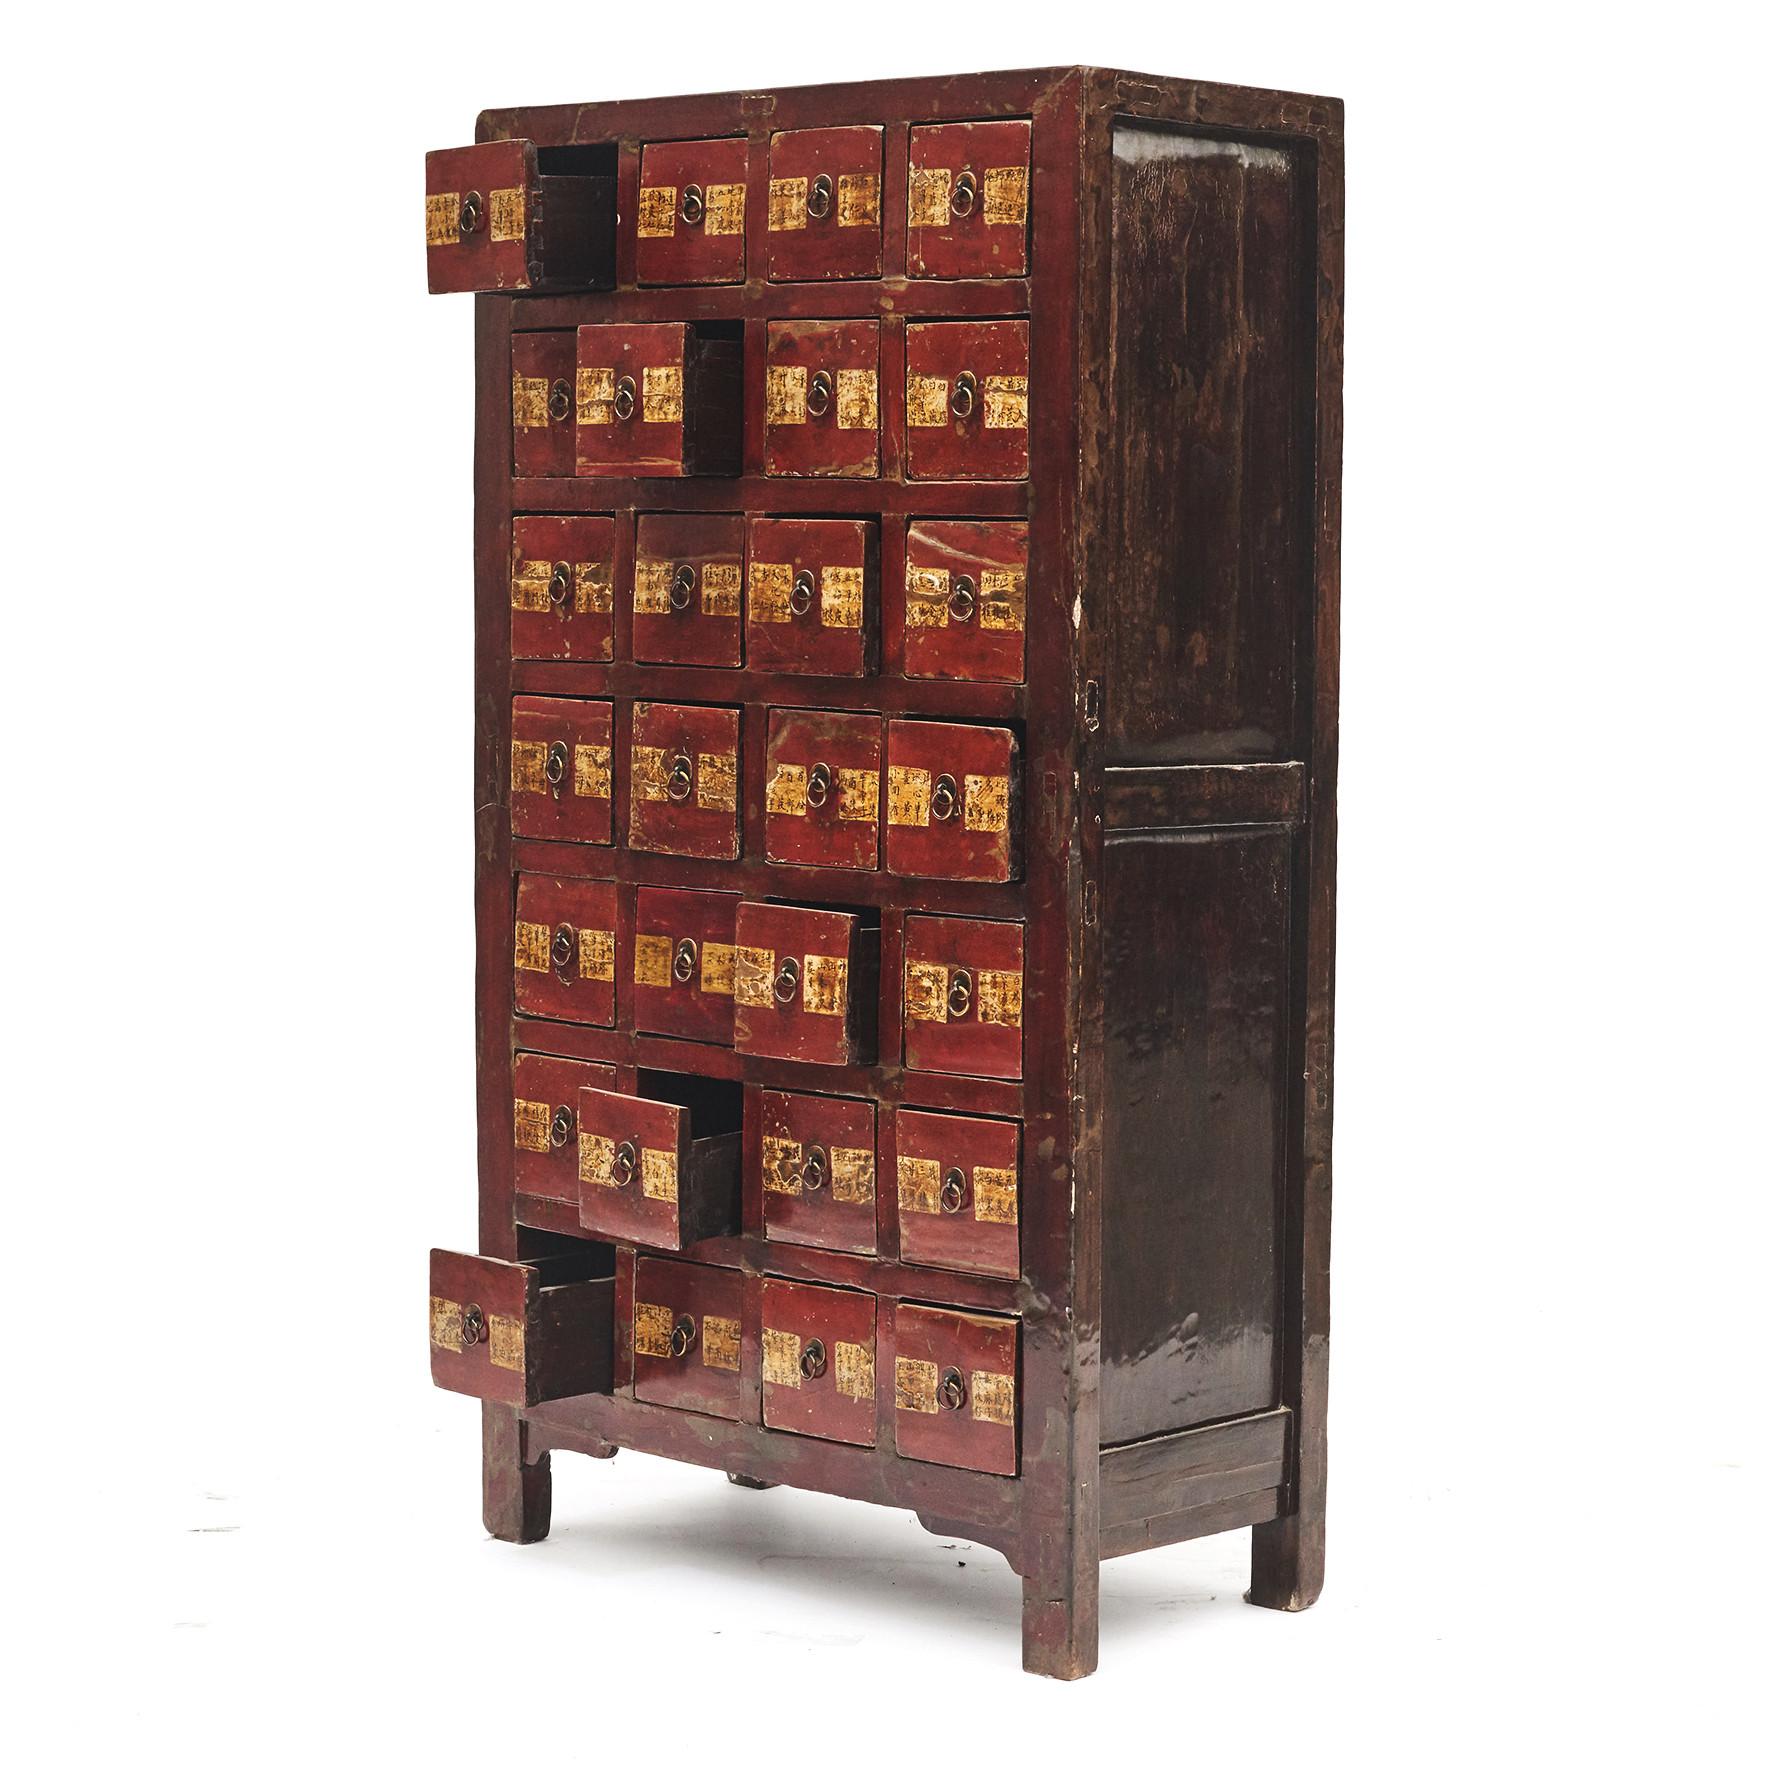 Chinese Apothecary 'Farmacy' Medicine Chest 5